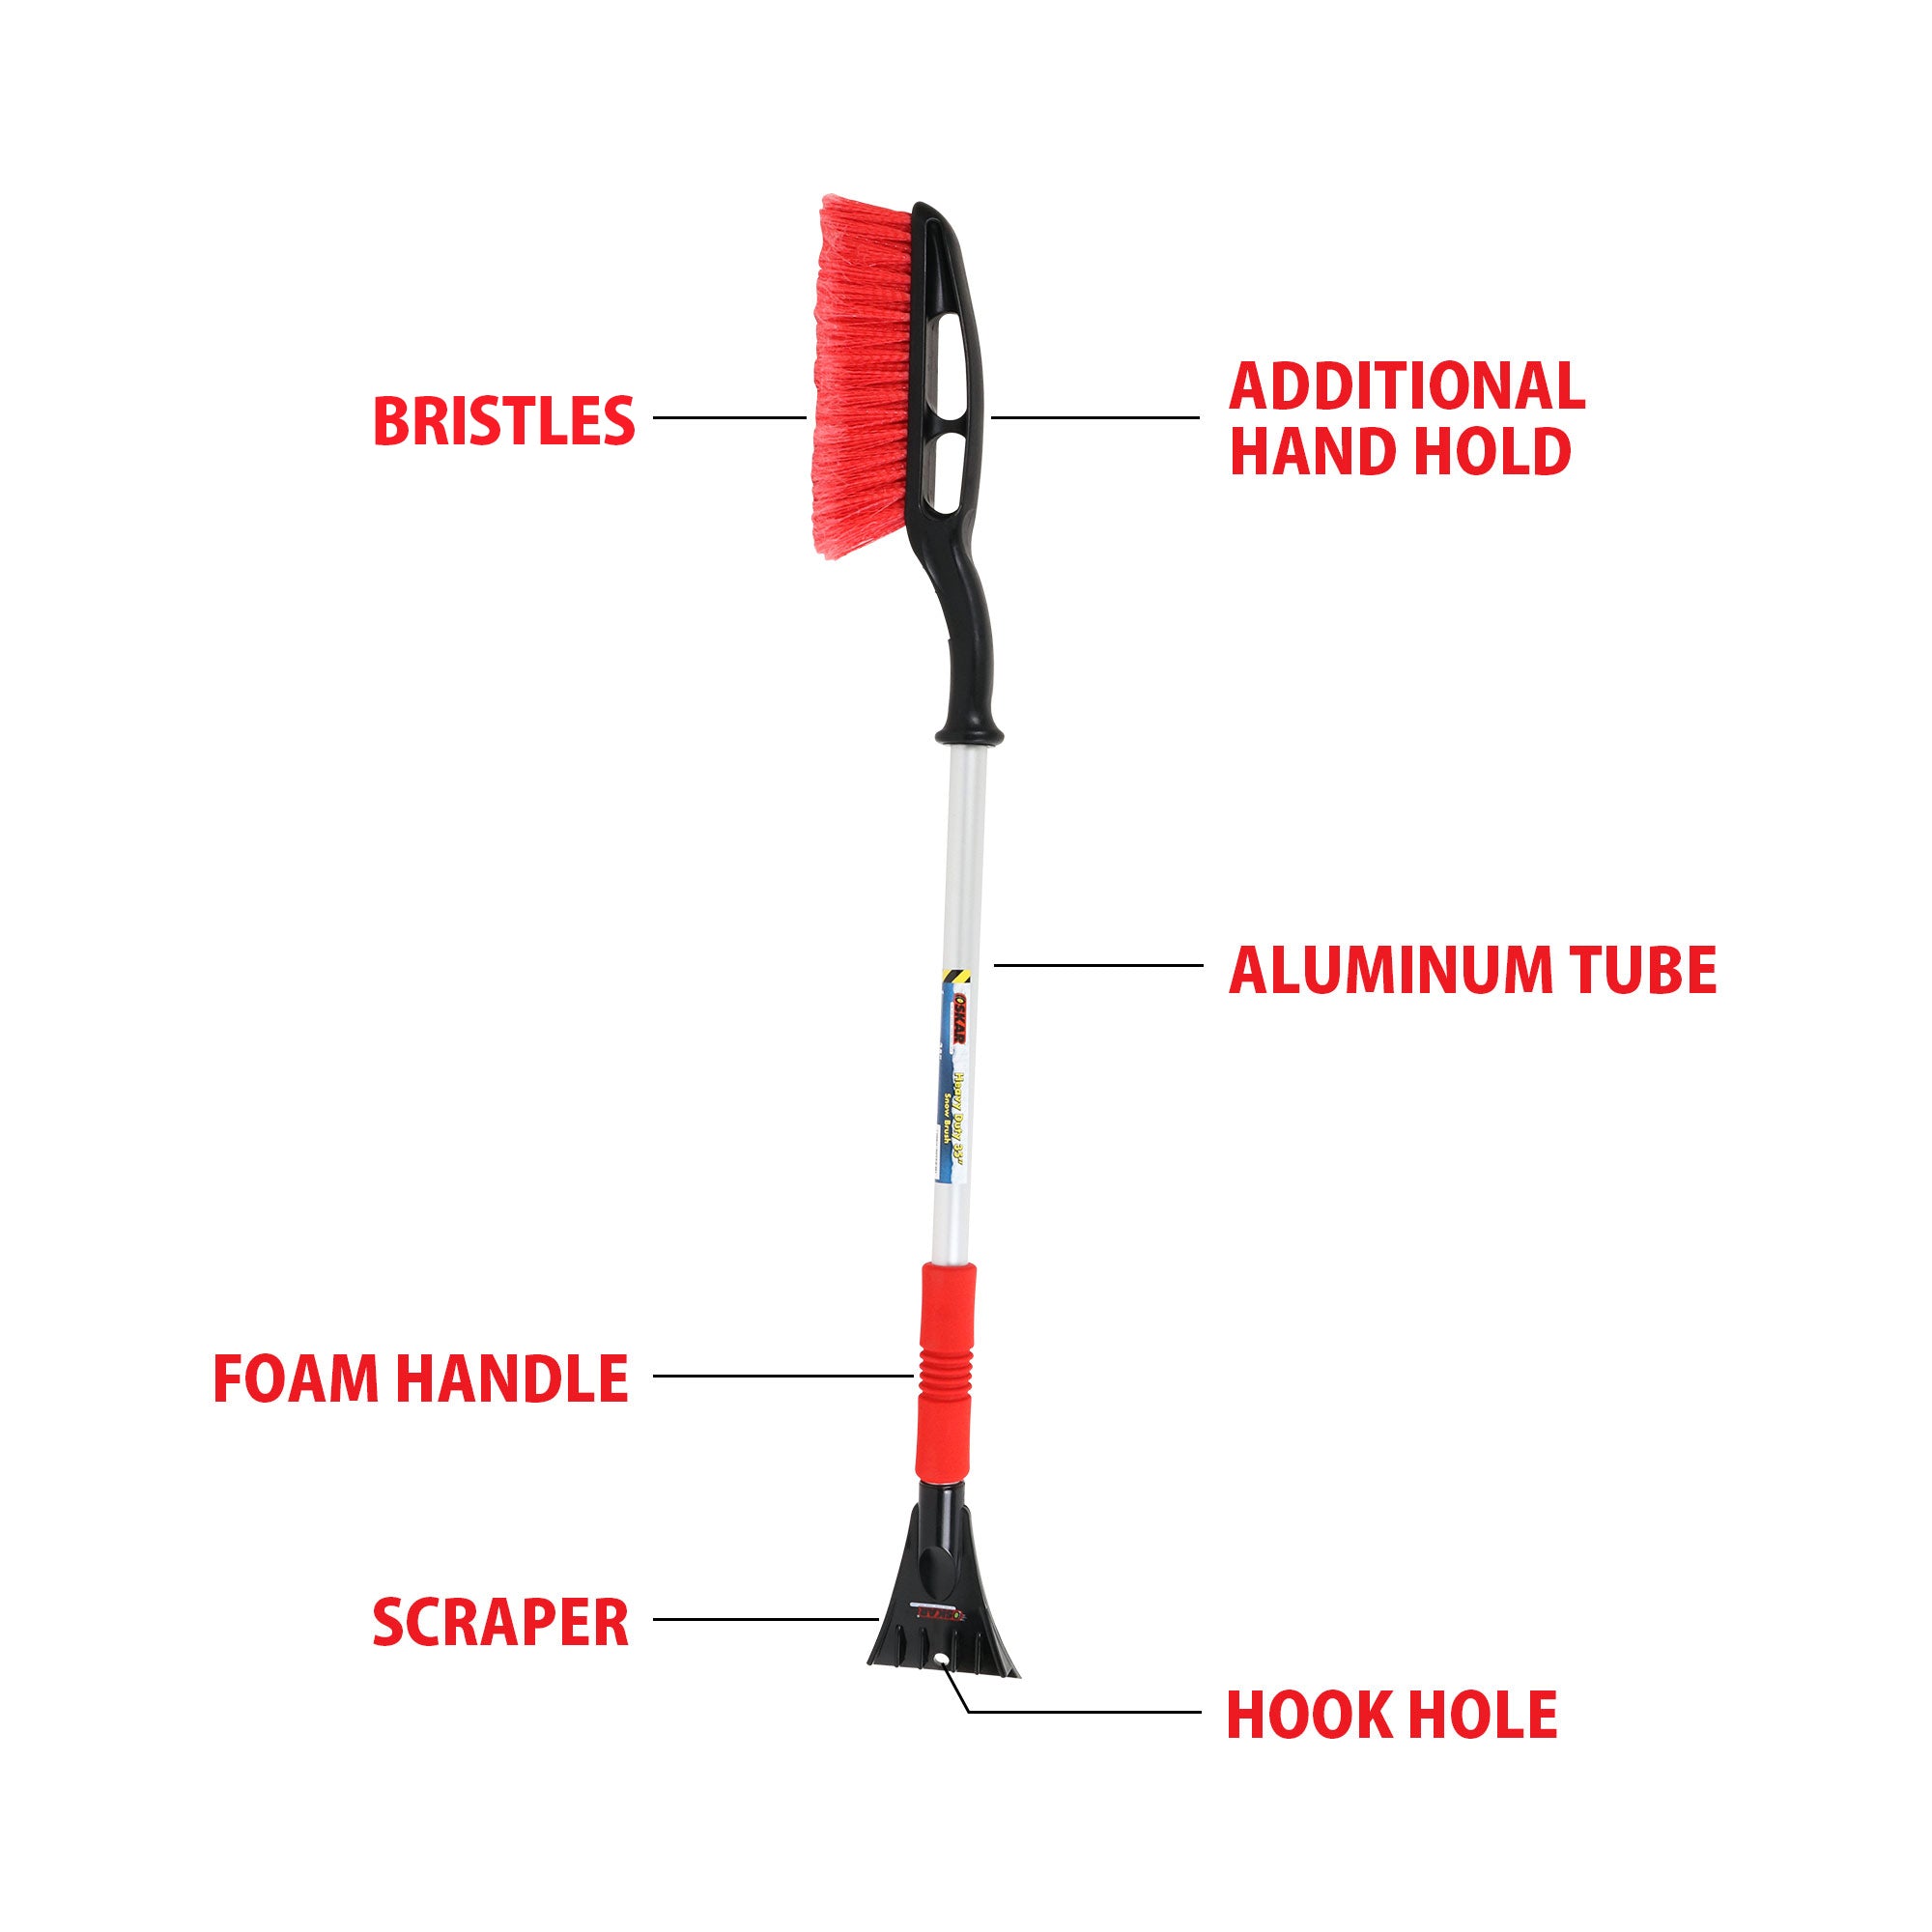 Product shot on white background of snow brush with parts labeled: Bristles; additional hand hold; aluminum tube; foam handle; scraper; hook hole